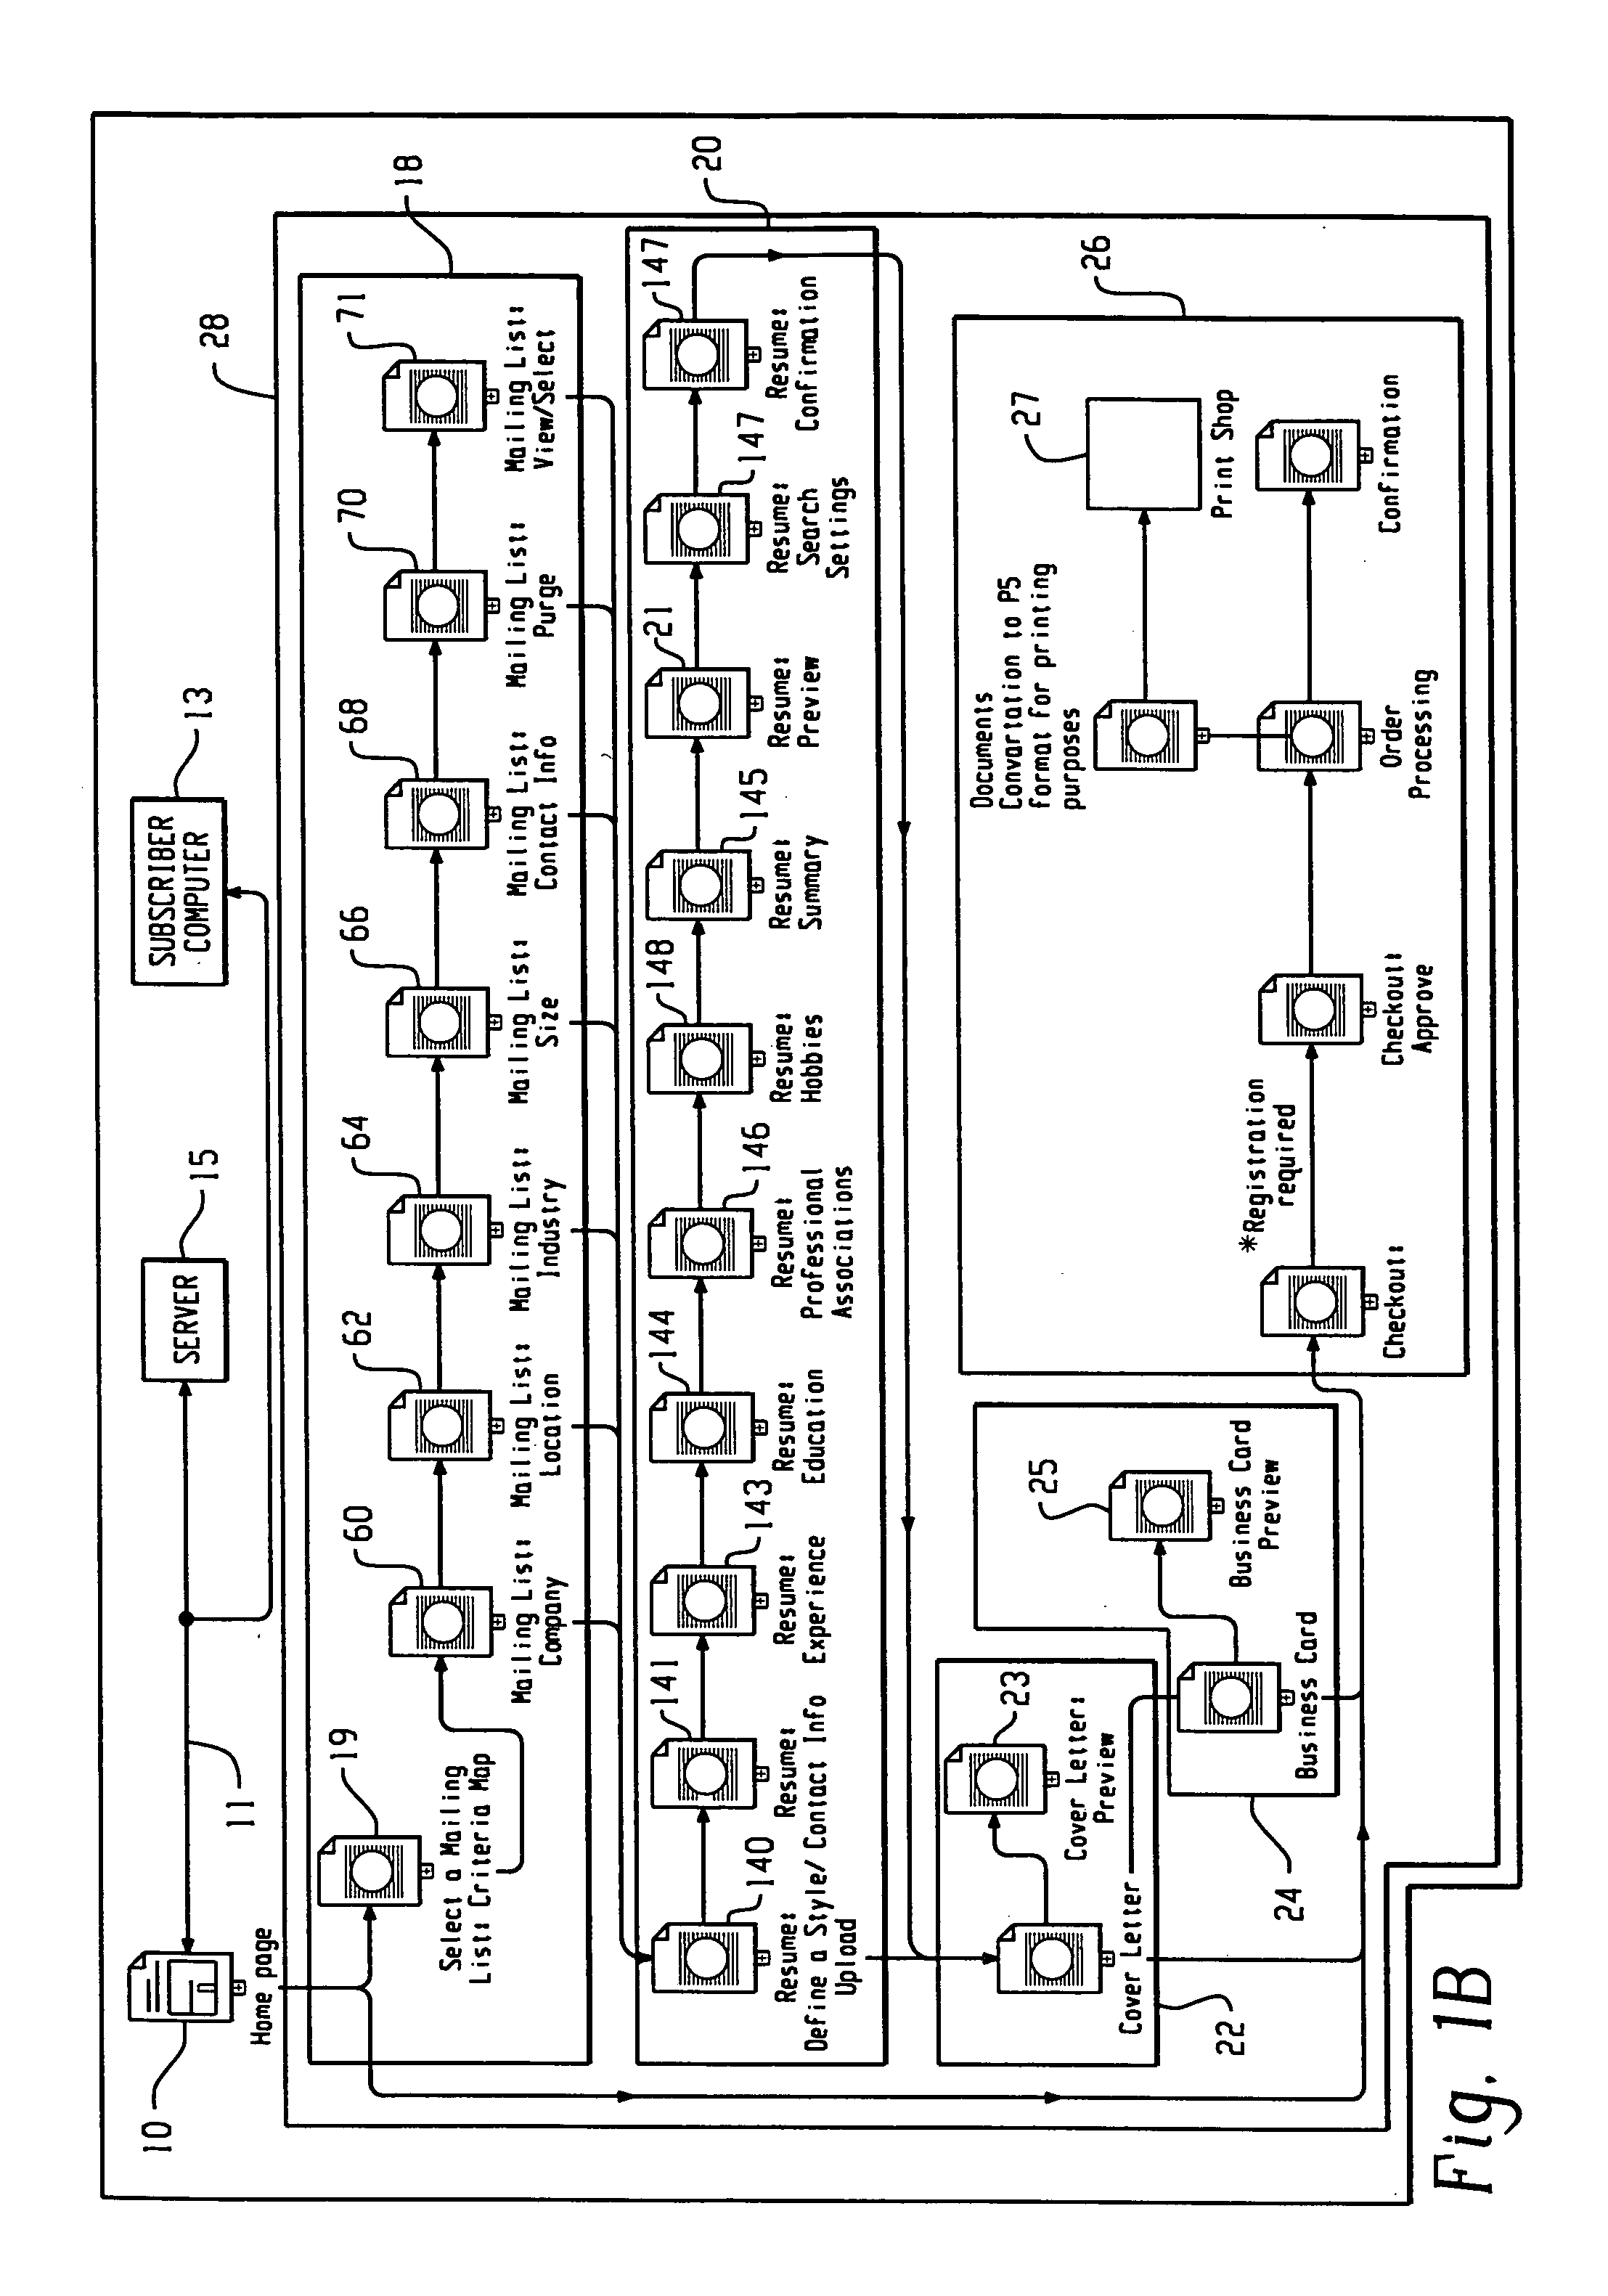 Method and system for operating a web based service